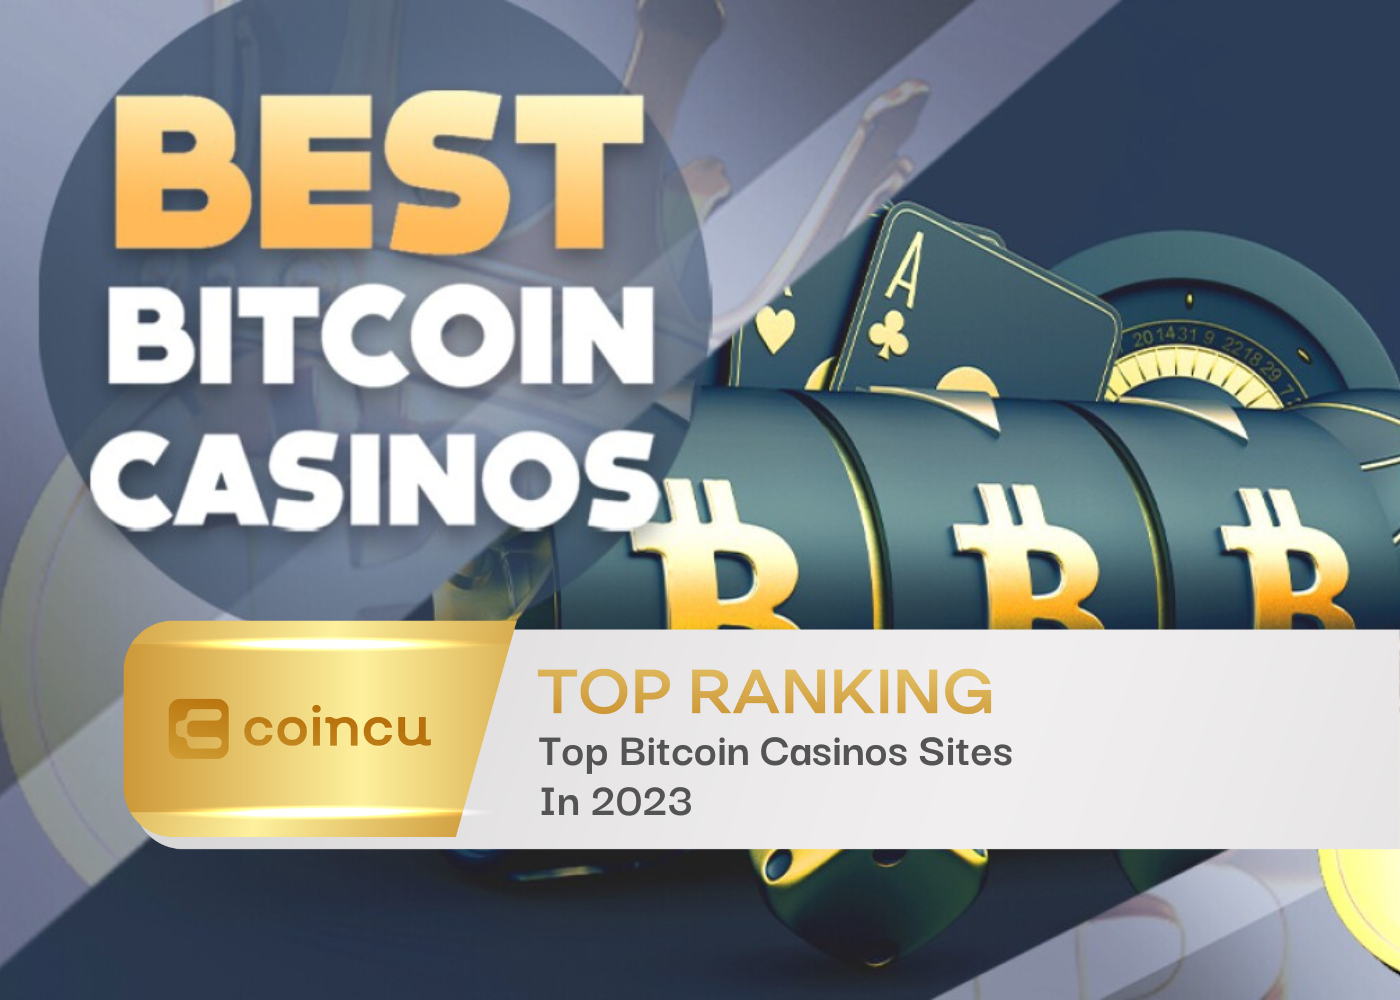 bitcoin casino Is Your Worst Enemy. 10 Ways To Defeat It